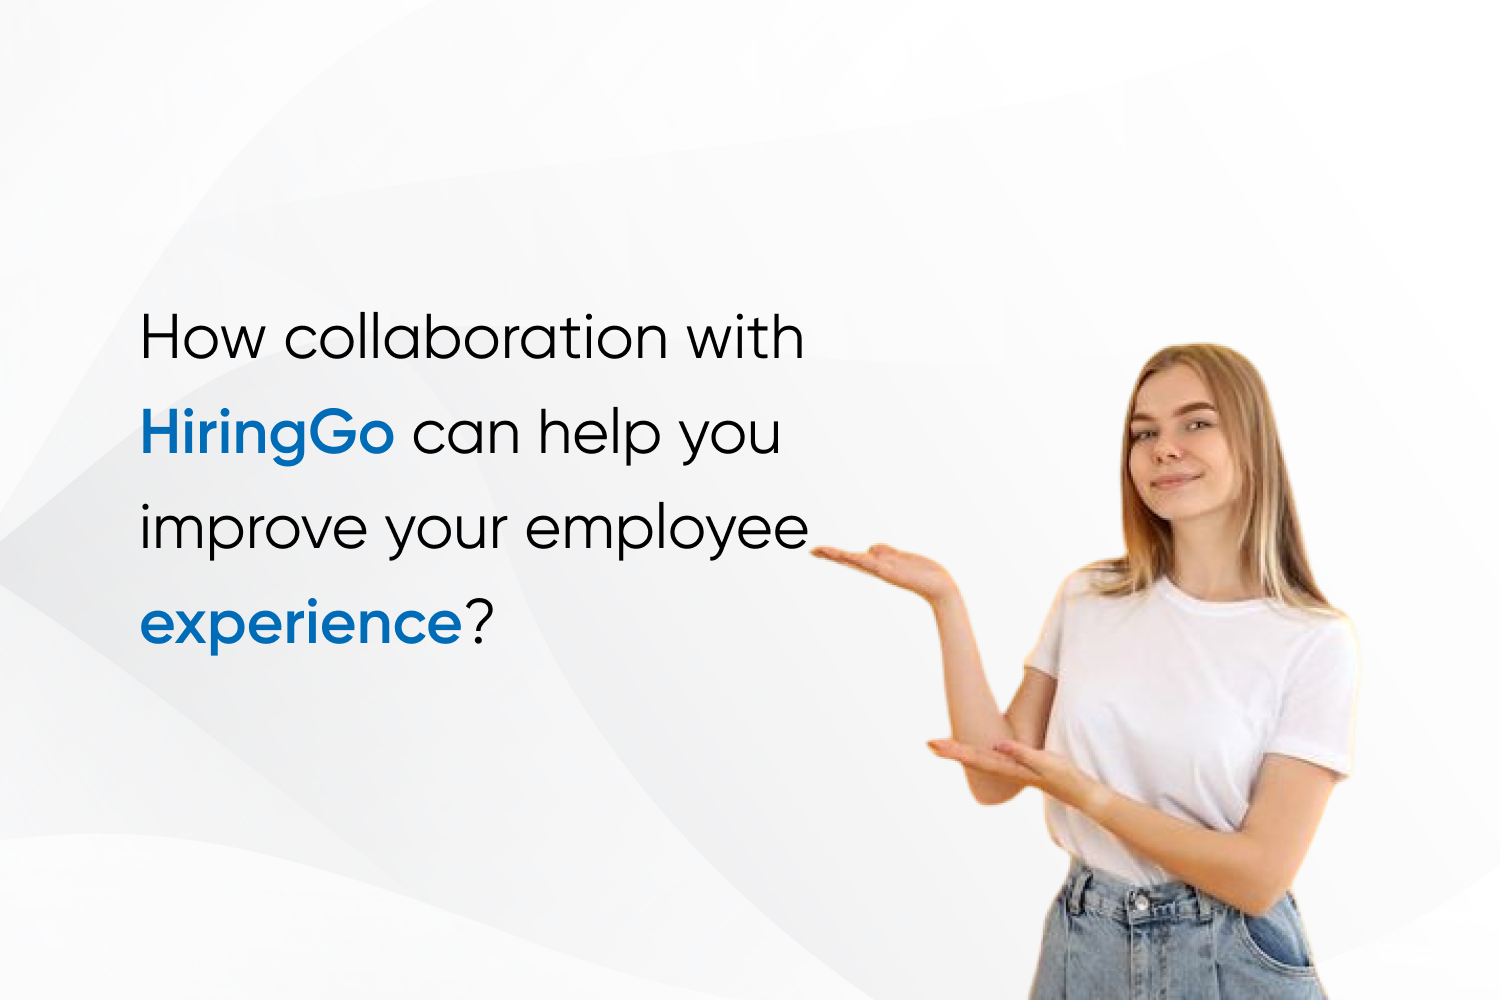 How collaboration with HiringGo can help you improve your employee experience